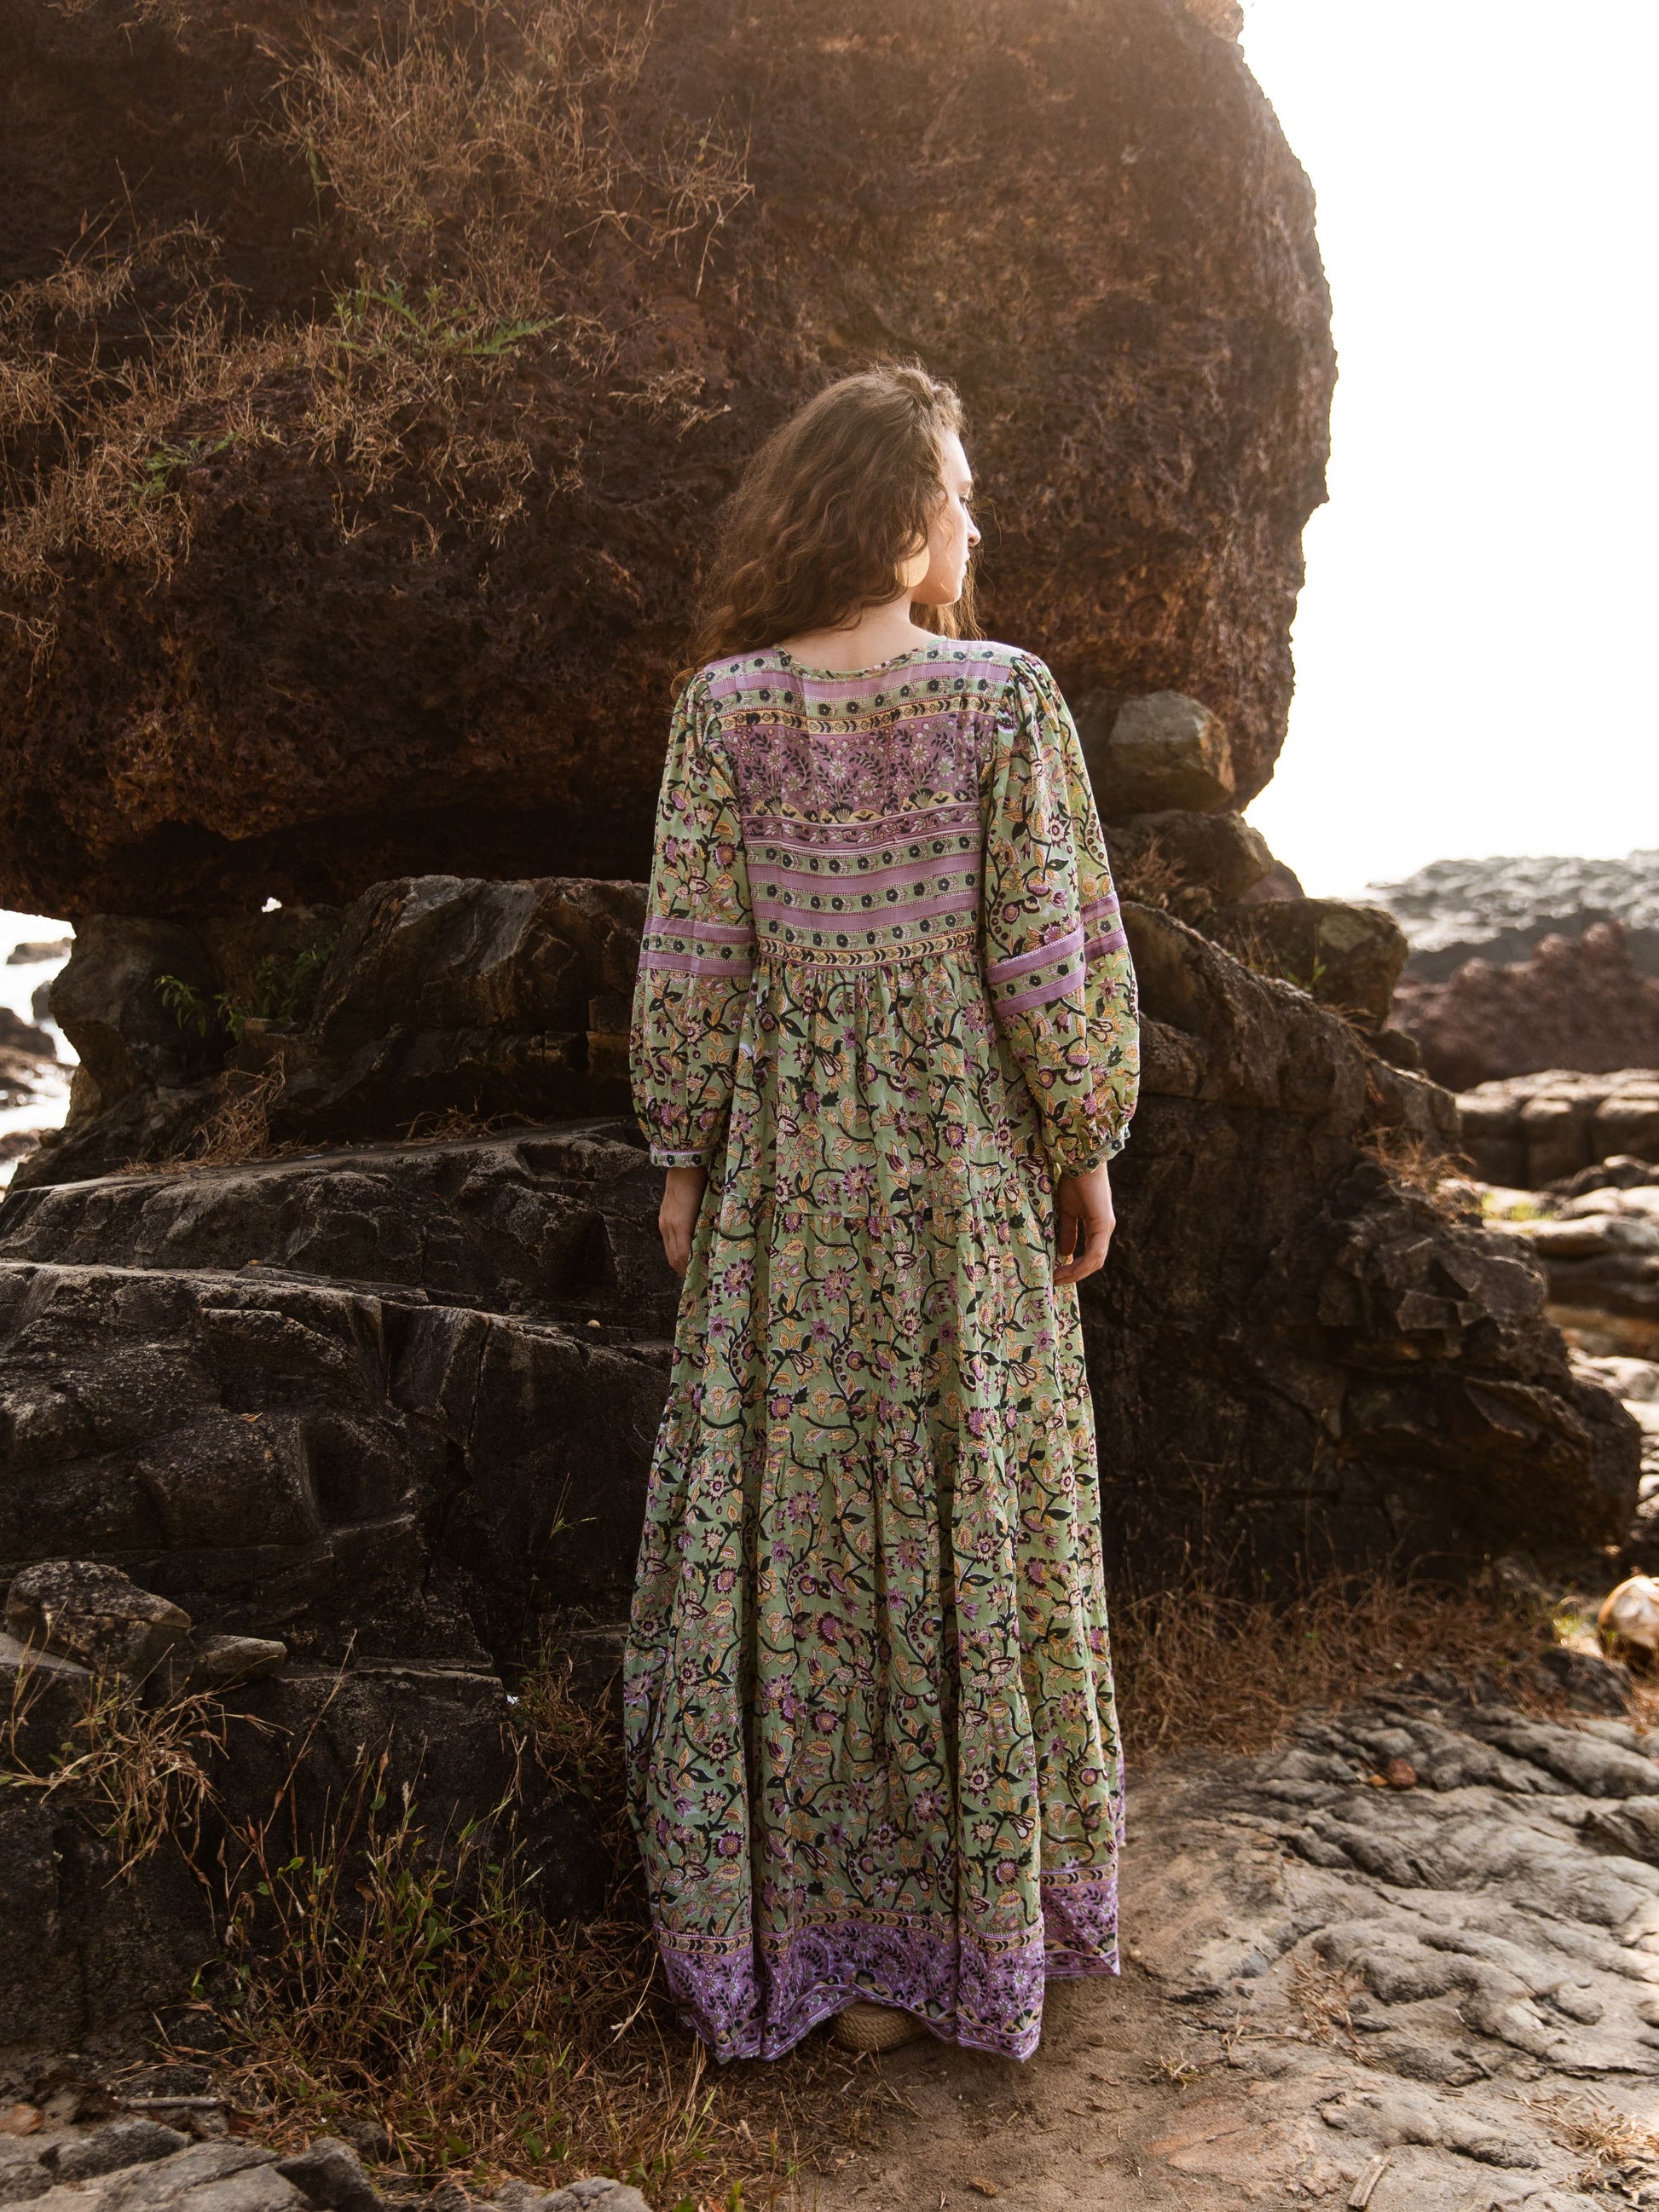 Back view of the Ubek Bohemian Dress as the model looks out to sea